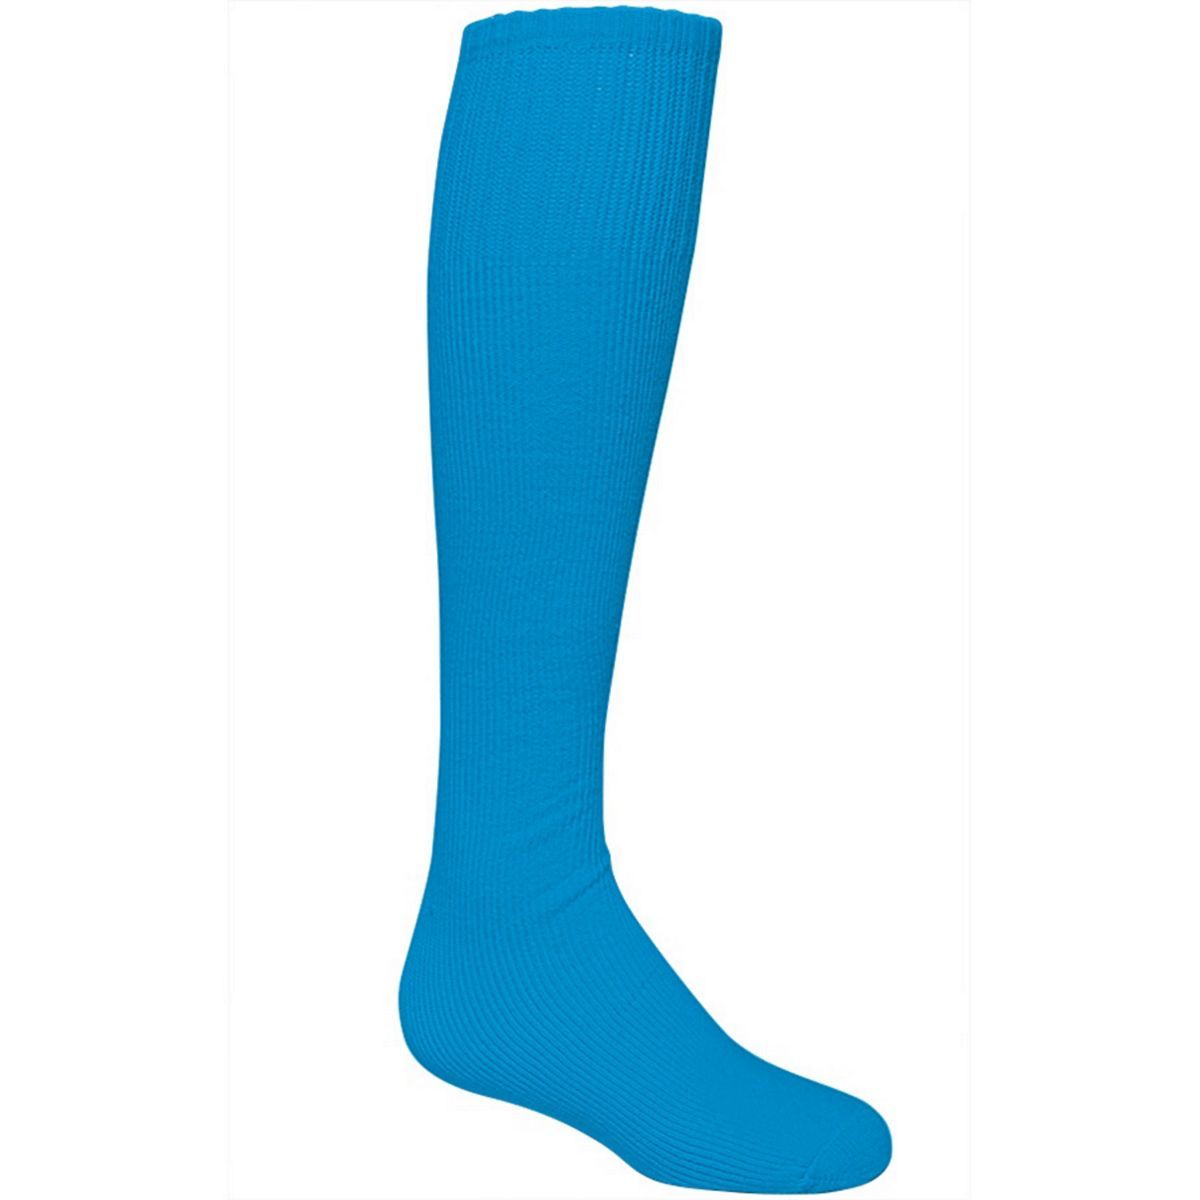 High 5 Athletic  Sock in Power Blue  -Part of the Accessories, High5-Products, Accessories-Socks product lines at KanaleyCreations.com